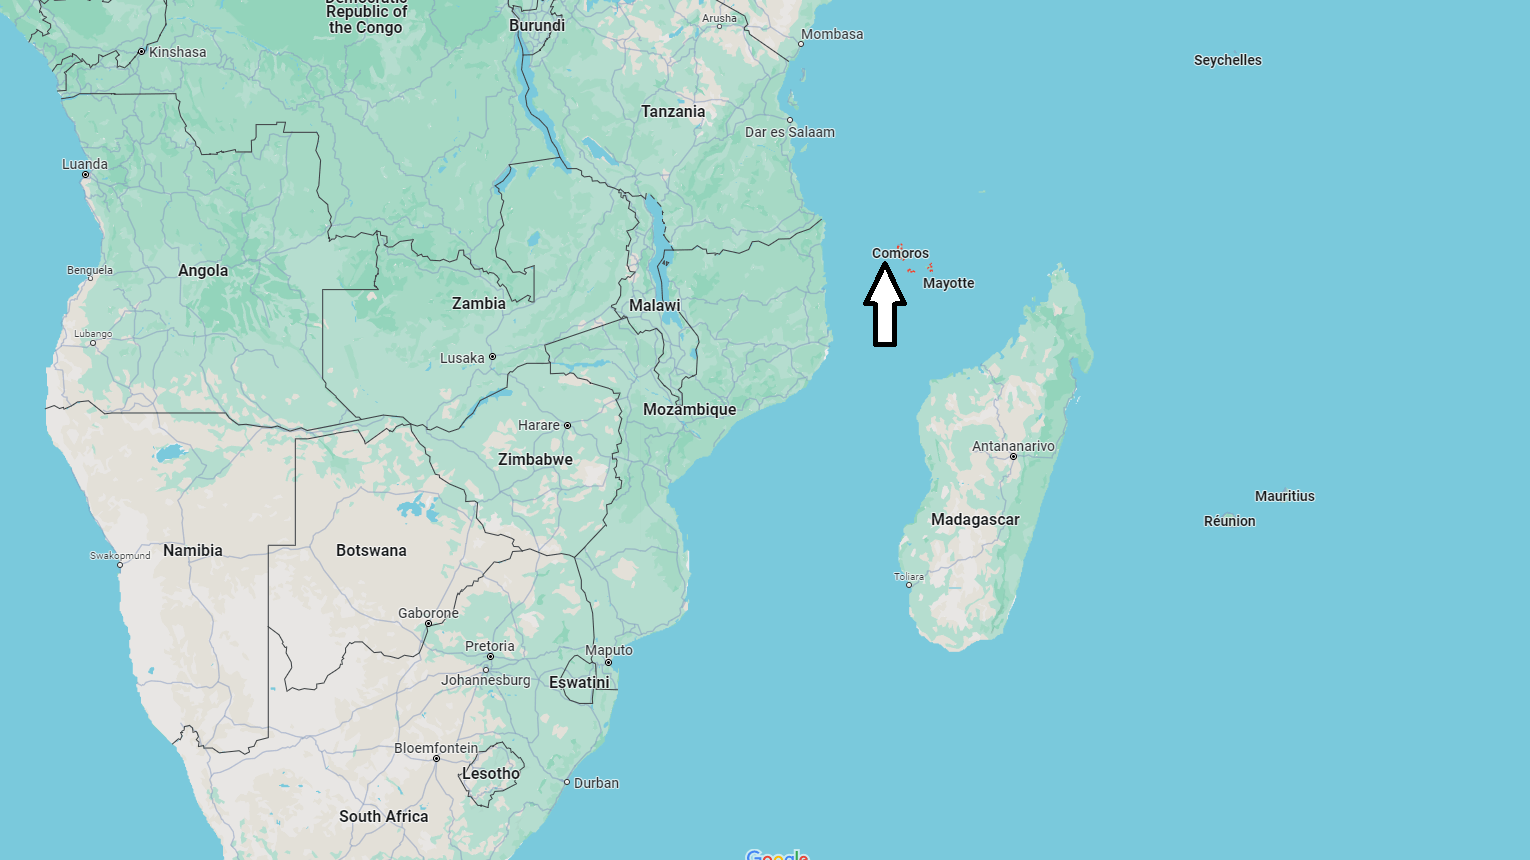 What Continent is Comoros in